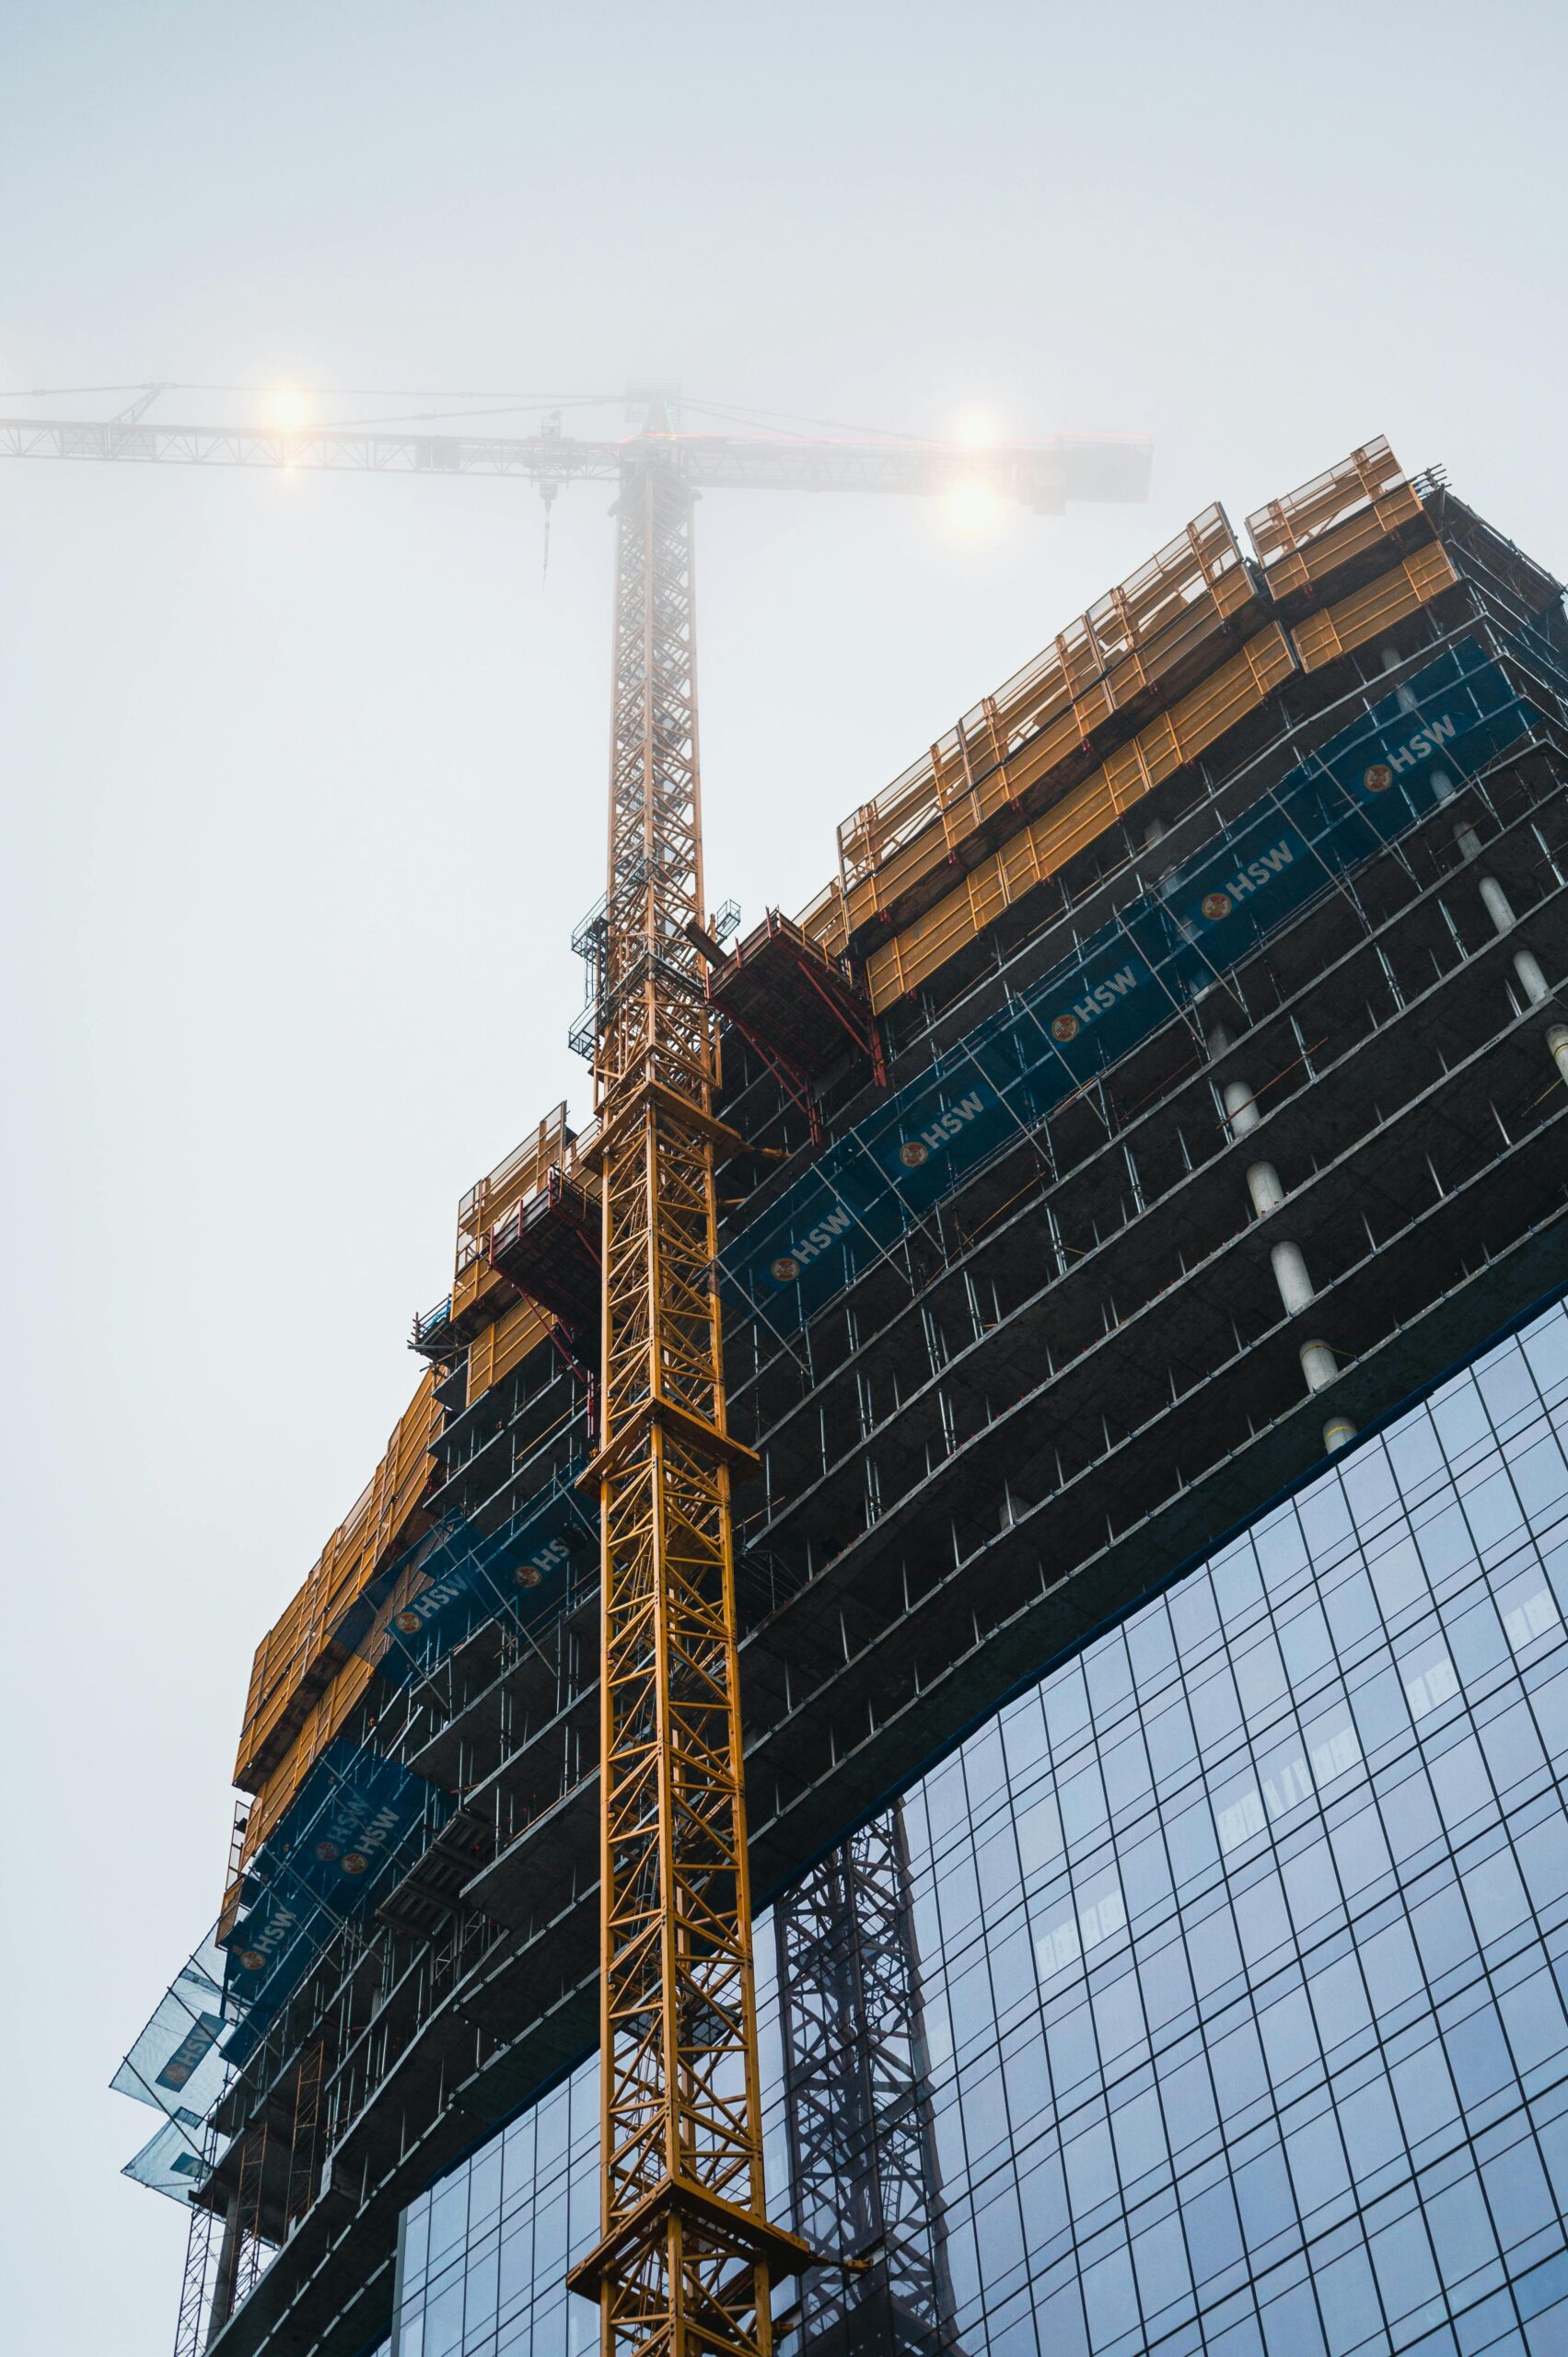 View of Office Building Facade and Construction Crane with Top in Fog